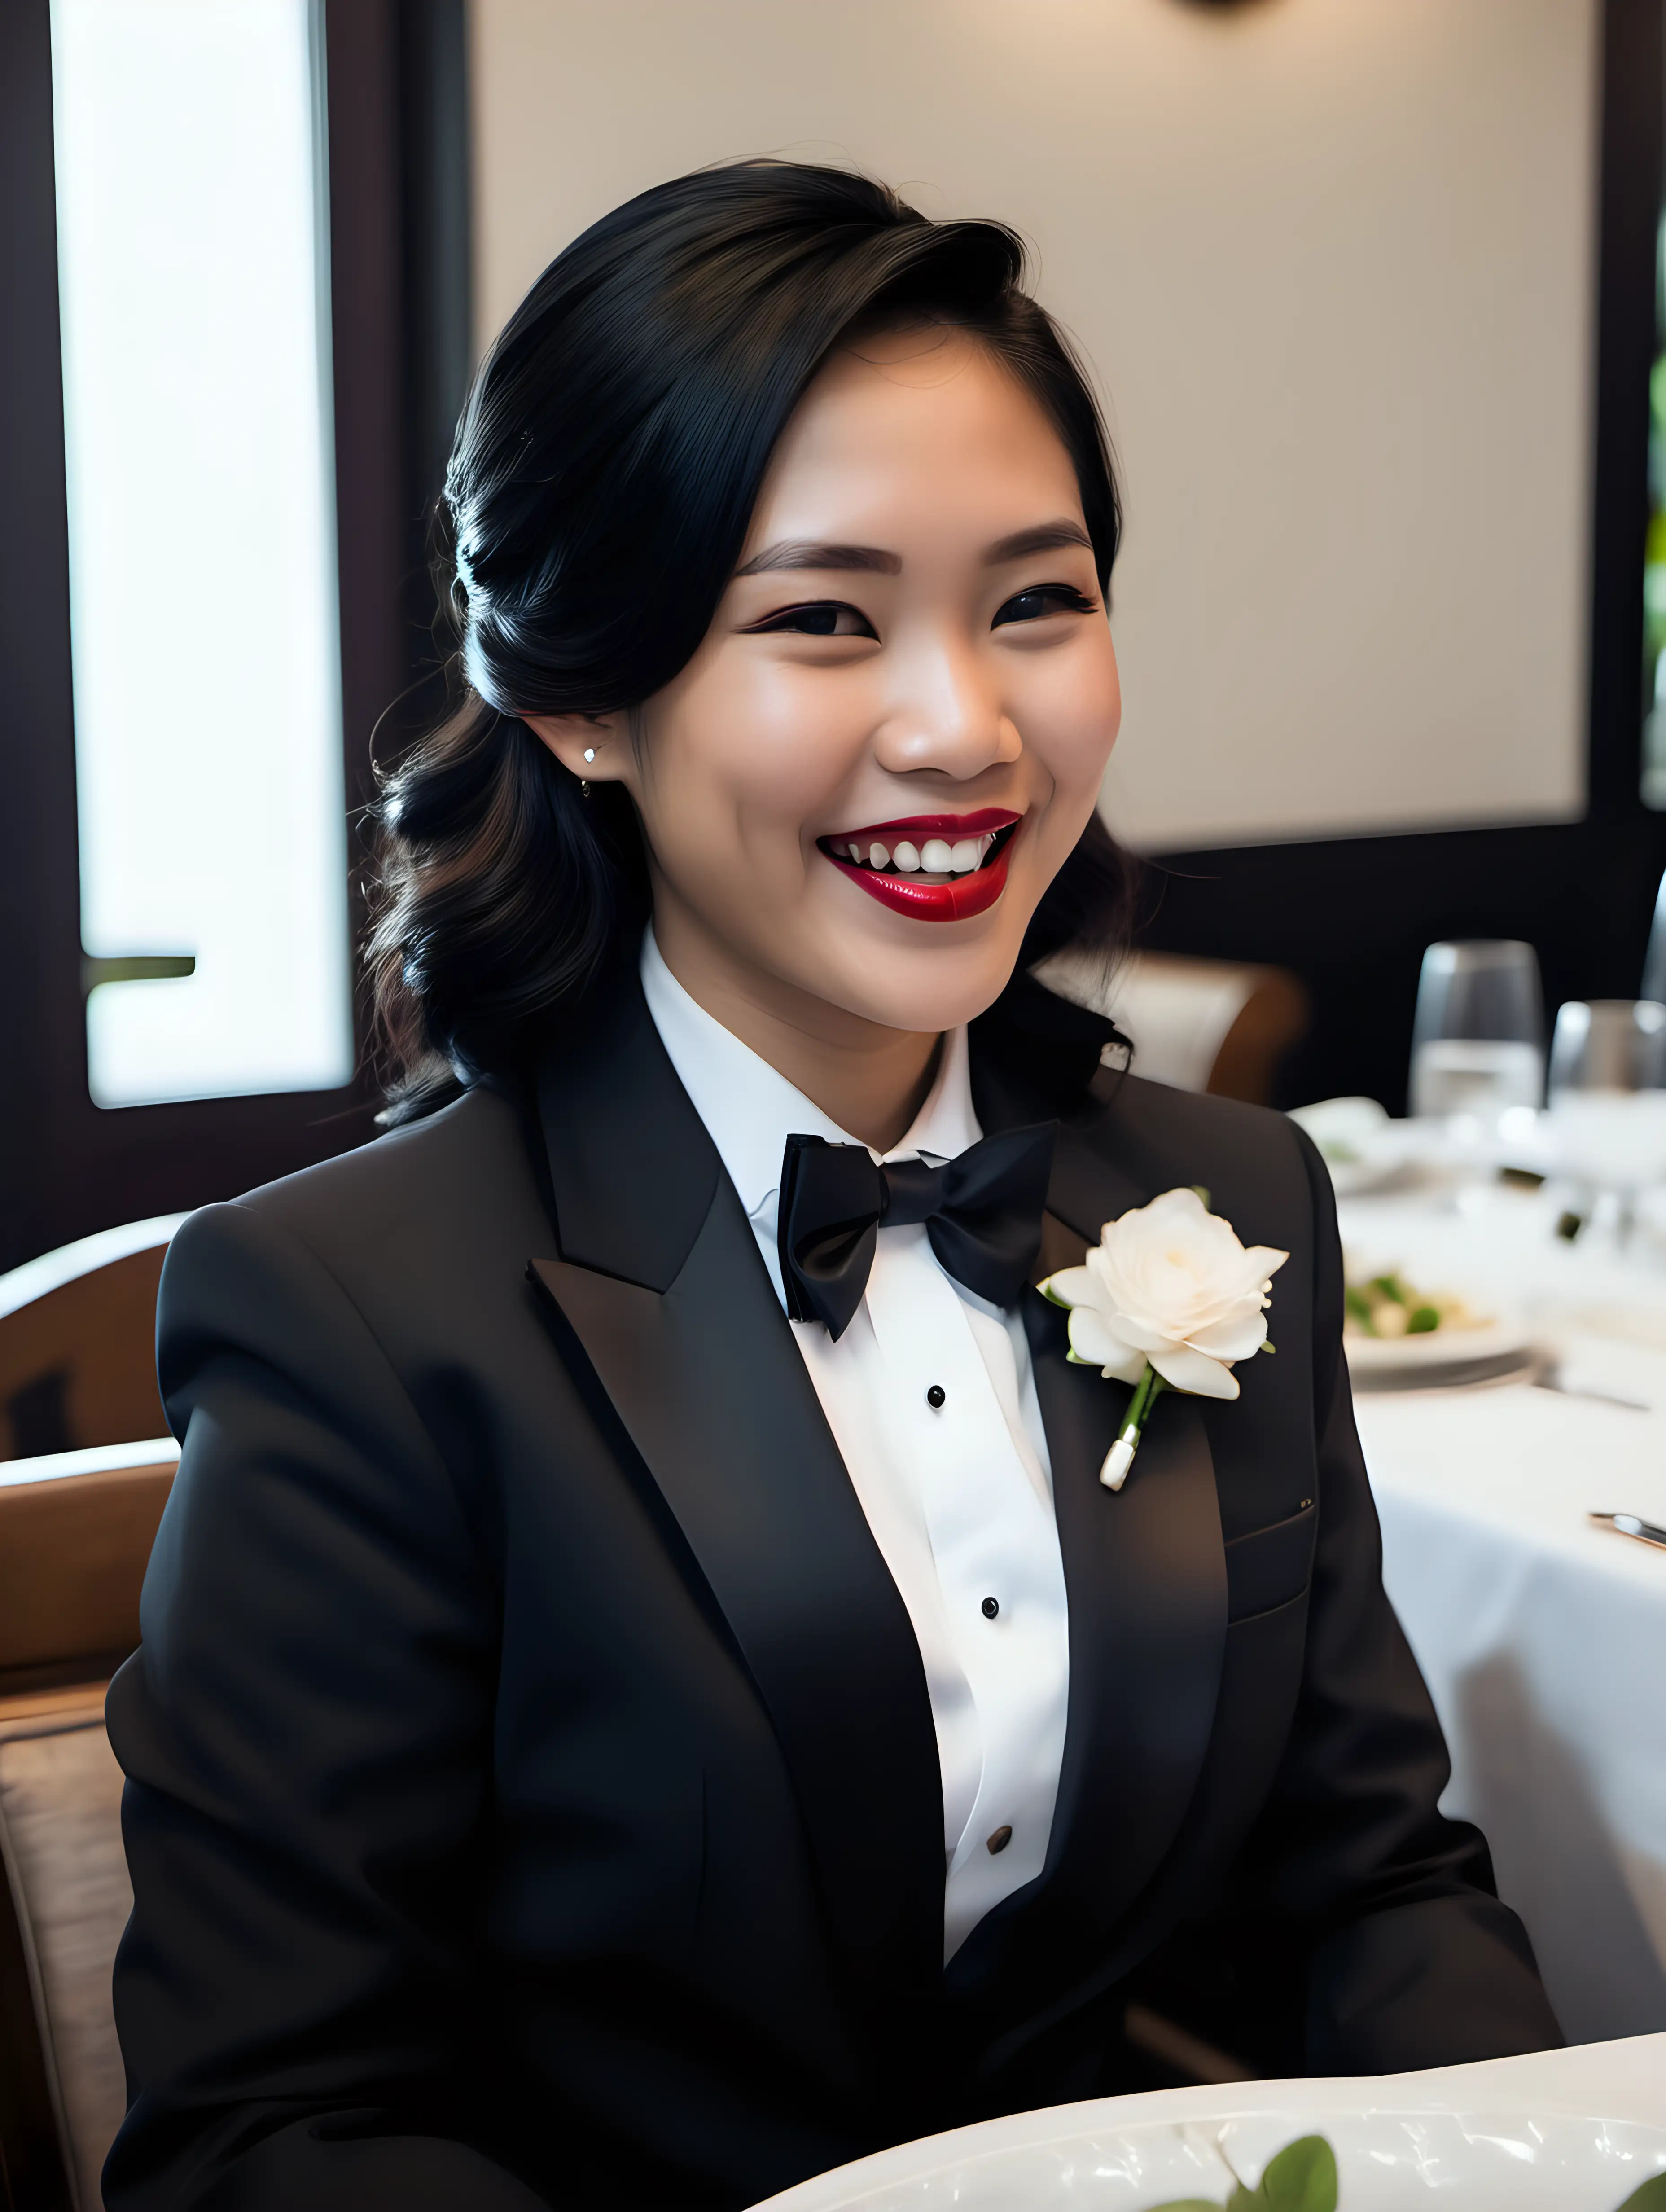 30 year old smiling and laughing thai woman with black shoulder length hair and lipstick wearing a formal tuxedo with a black bow tie and cufflinks. Her jacket has a corsage. She is sitting at a dinner table.  Her jacket is open.